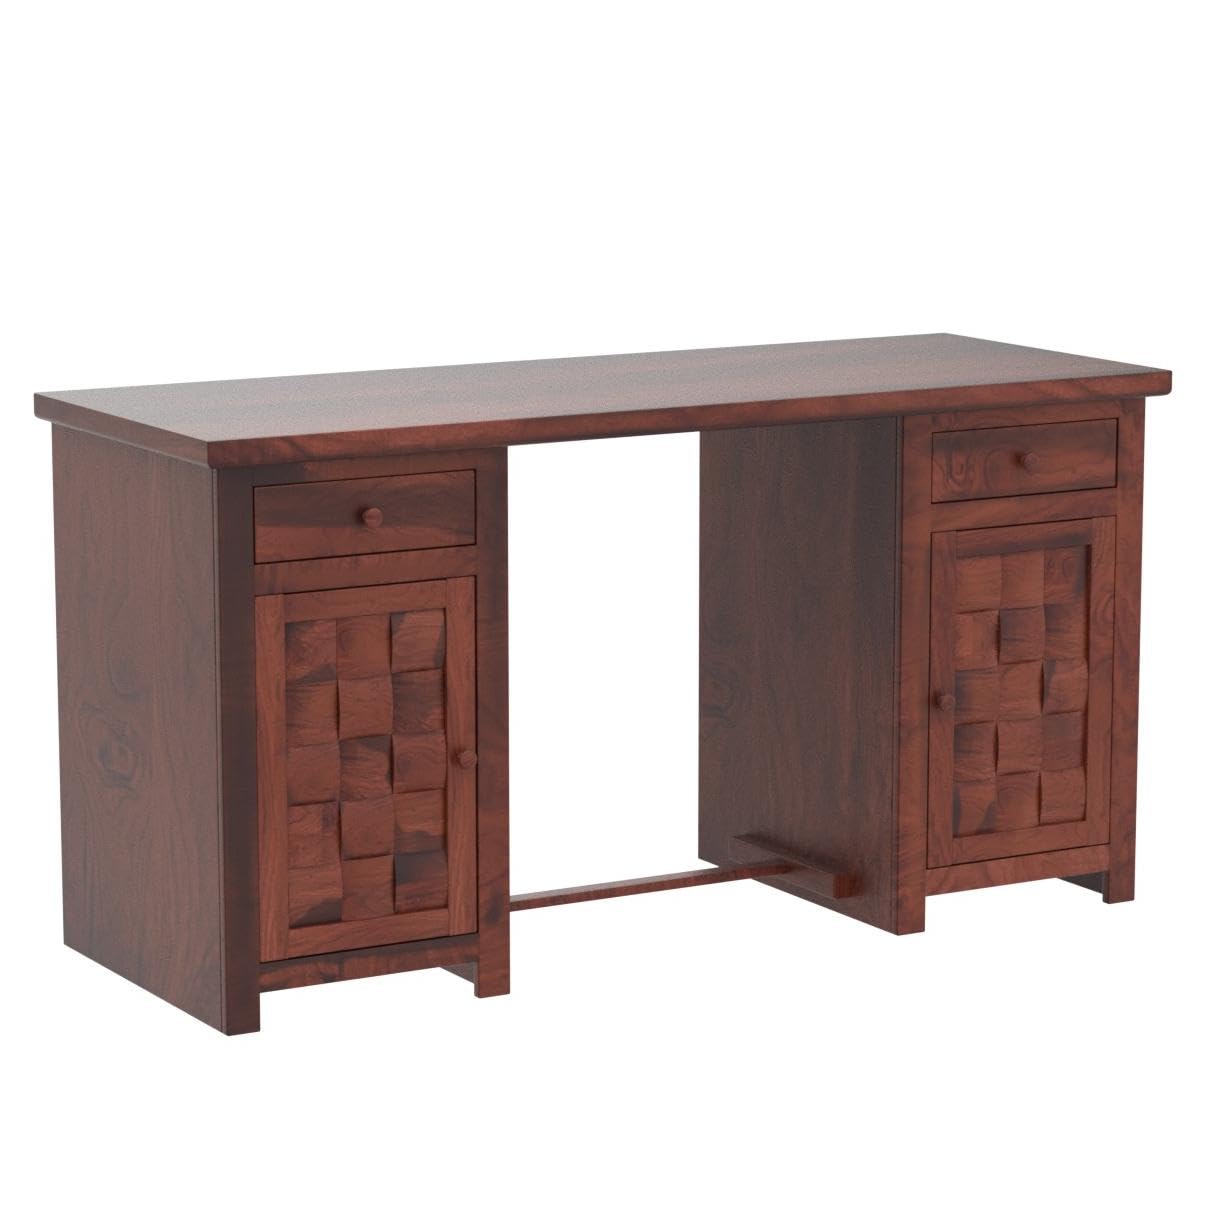 Solid Sheesham Wood Fossan Computer Table with 2 Drawers, 2 Storage Cabinets